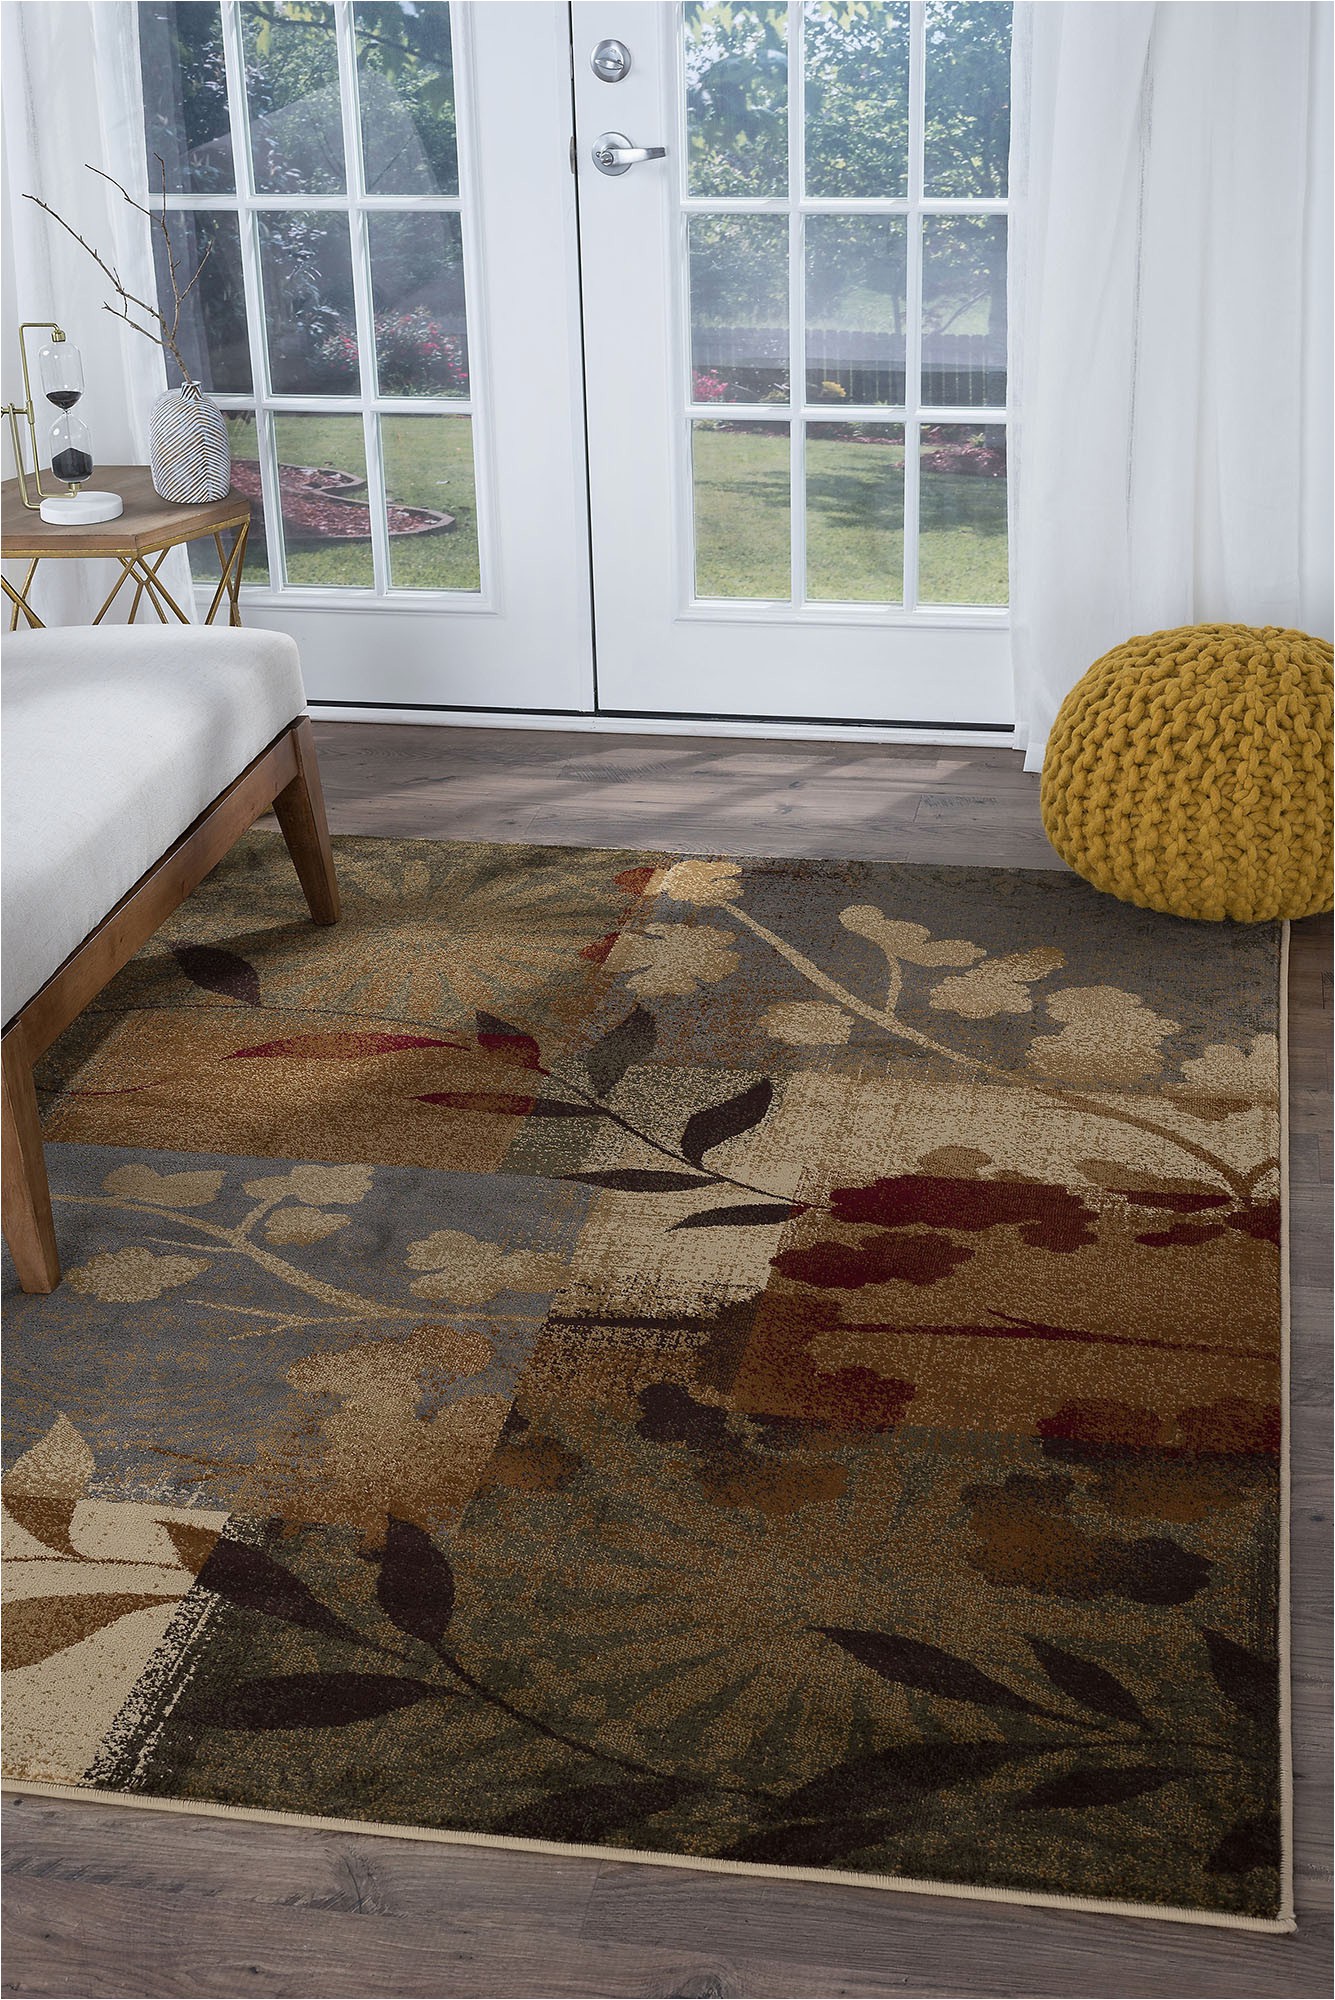 5×7 area Rugs Under 30 Details About Multi Color Floral Transitional area Rug Leaves 5×7 Carpet Actual 5 3" X 7 3"